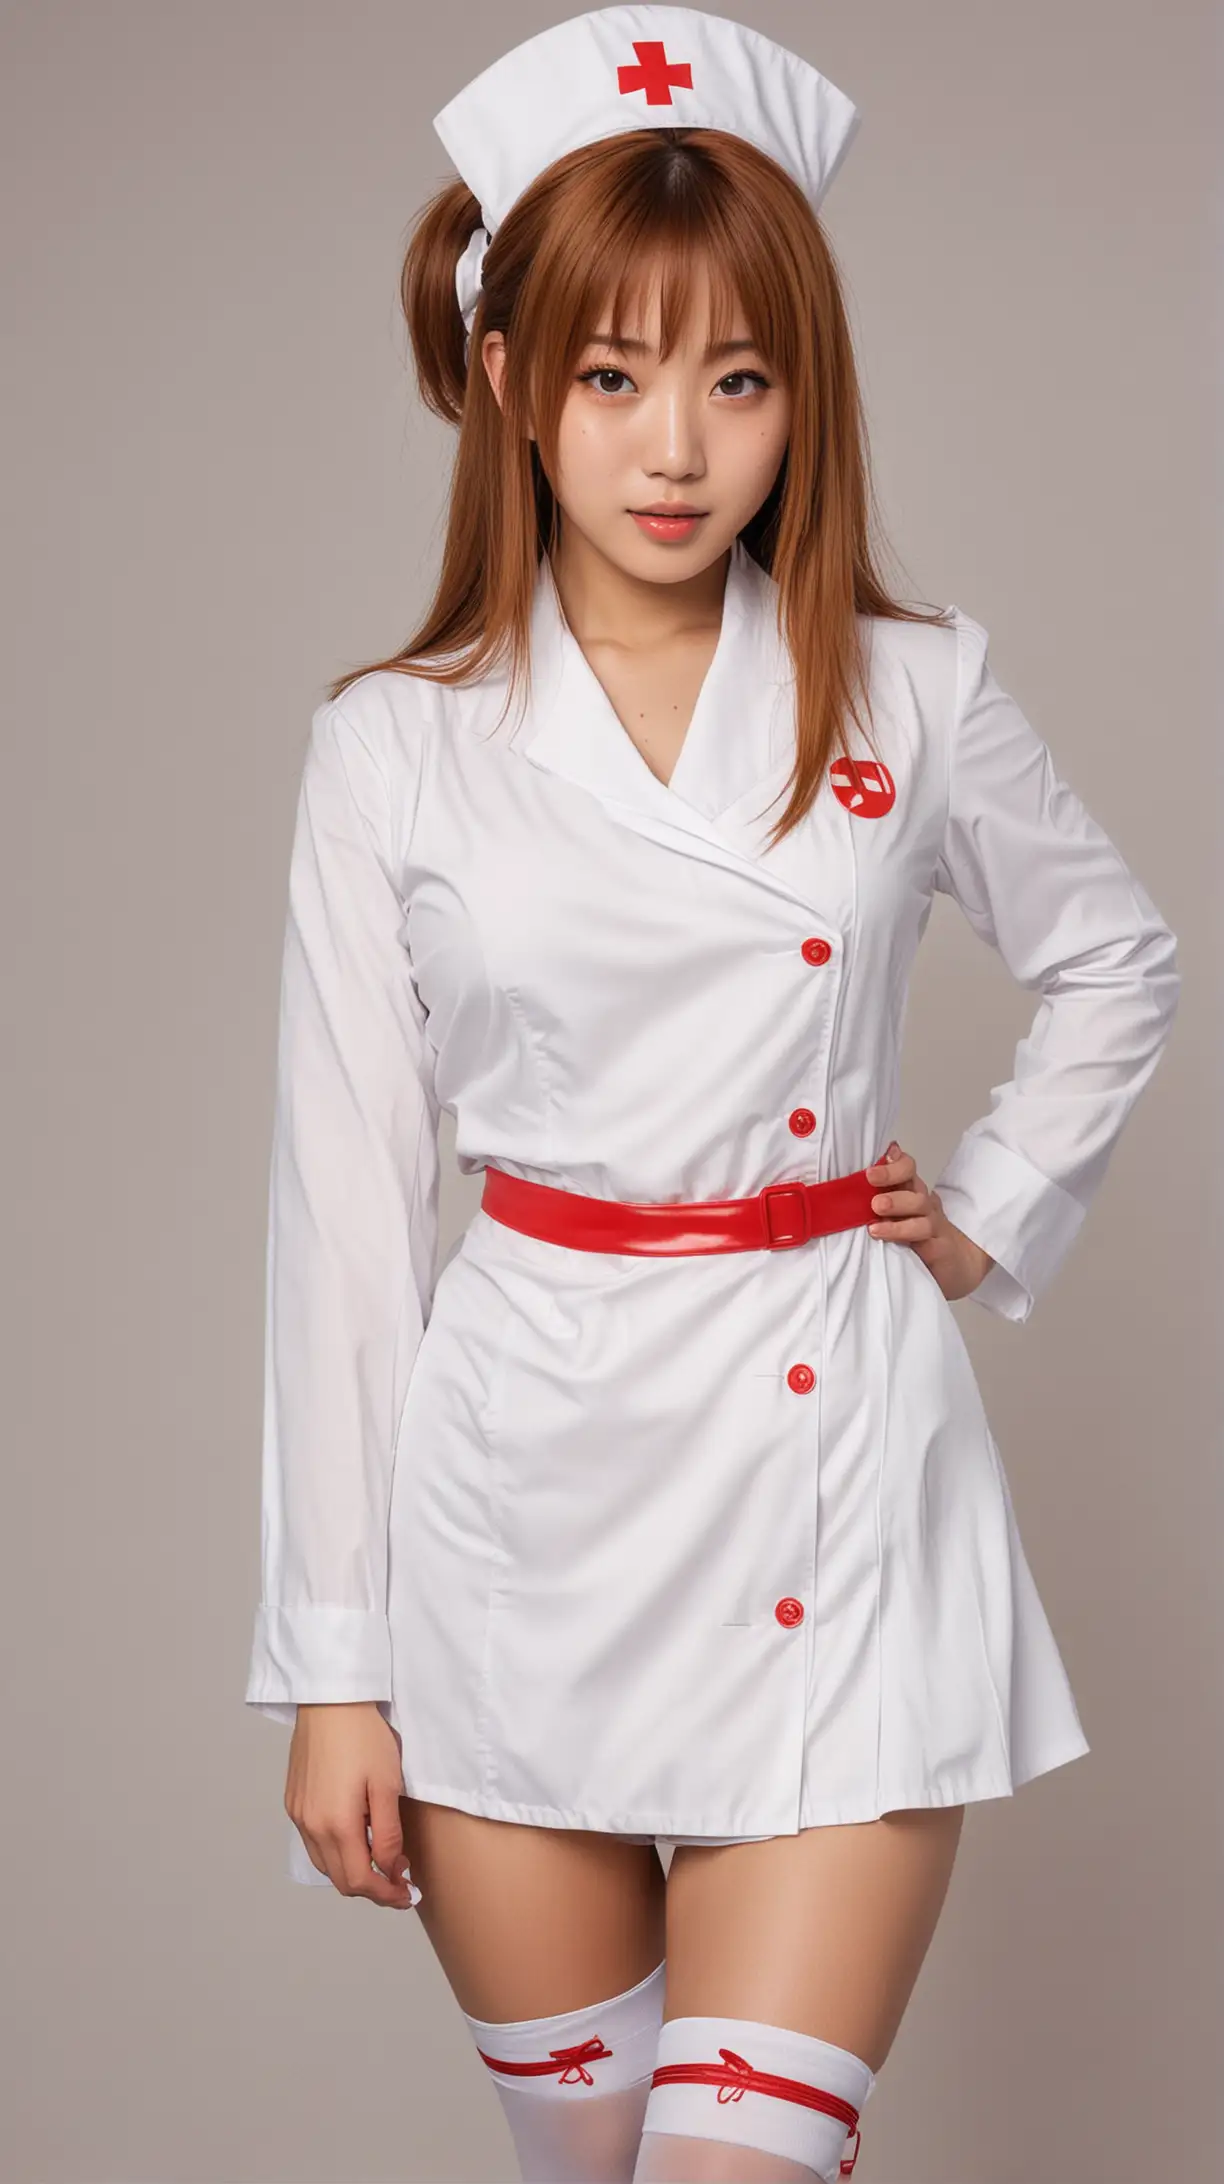 Fullbody japanese girl with caramel-colored medium length hair, freckles and huge amber eyes posing in sexy nurse costume